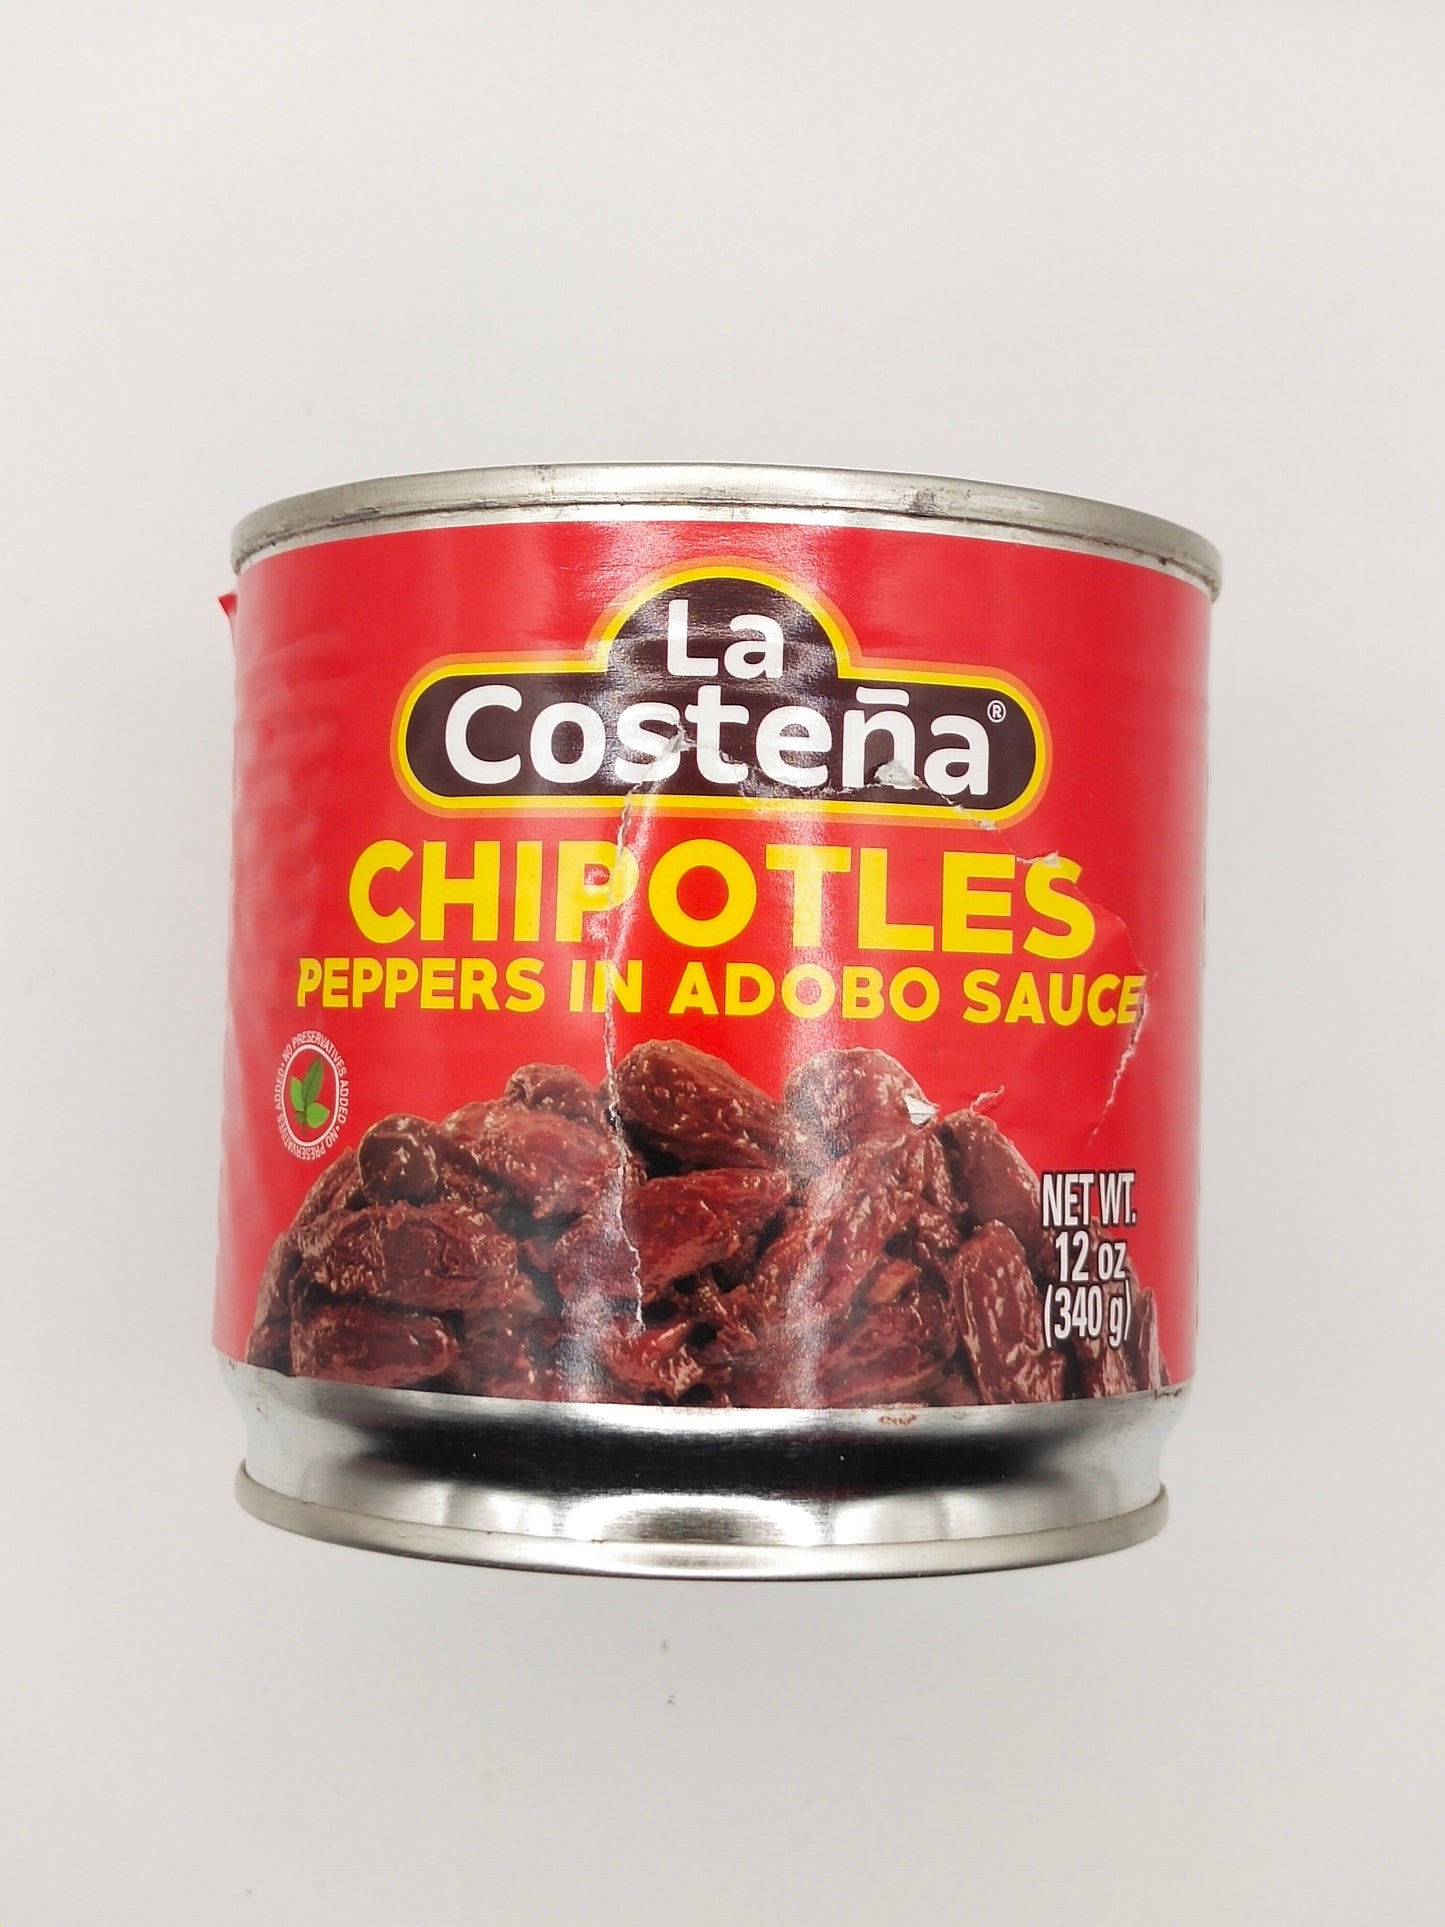 La Costena - Chipotles Peppers in Adobo Sauce